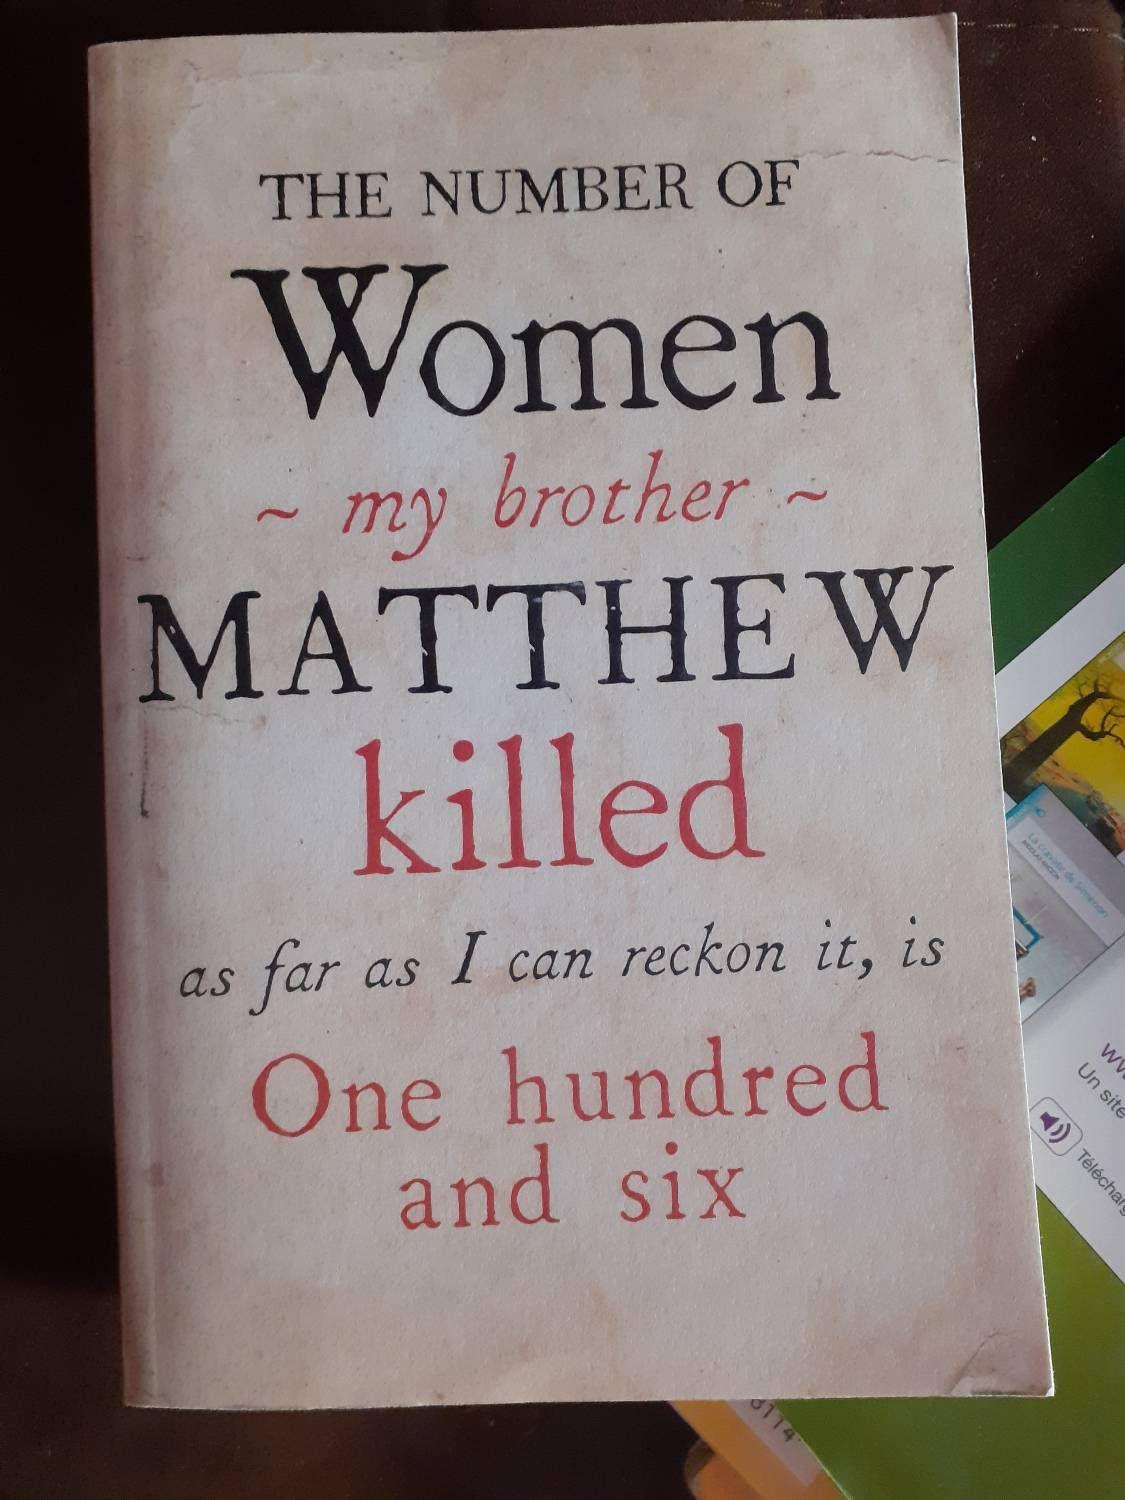 The number women my brother killed